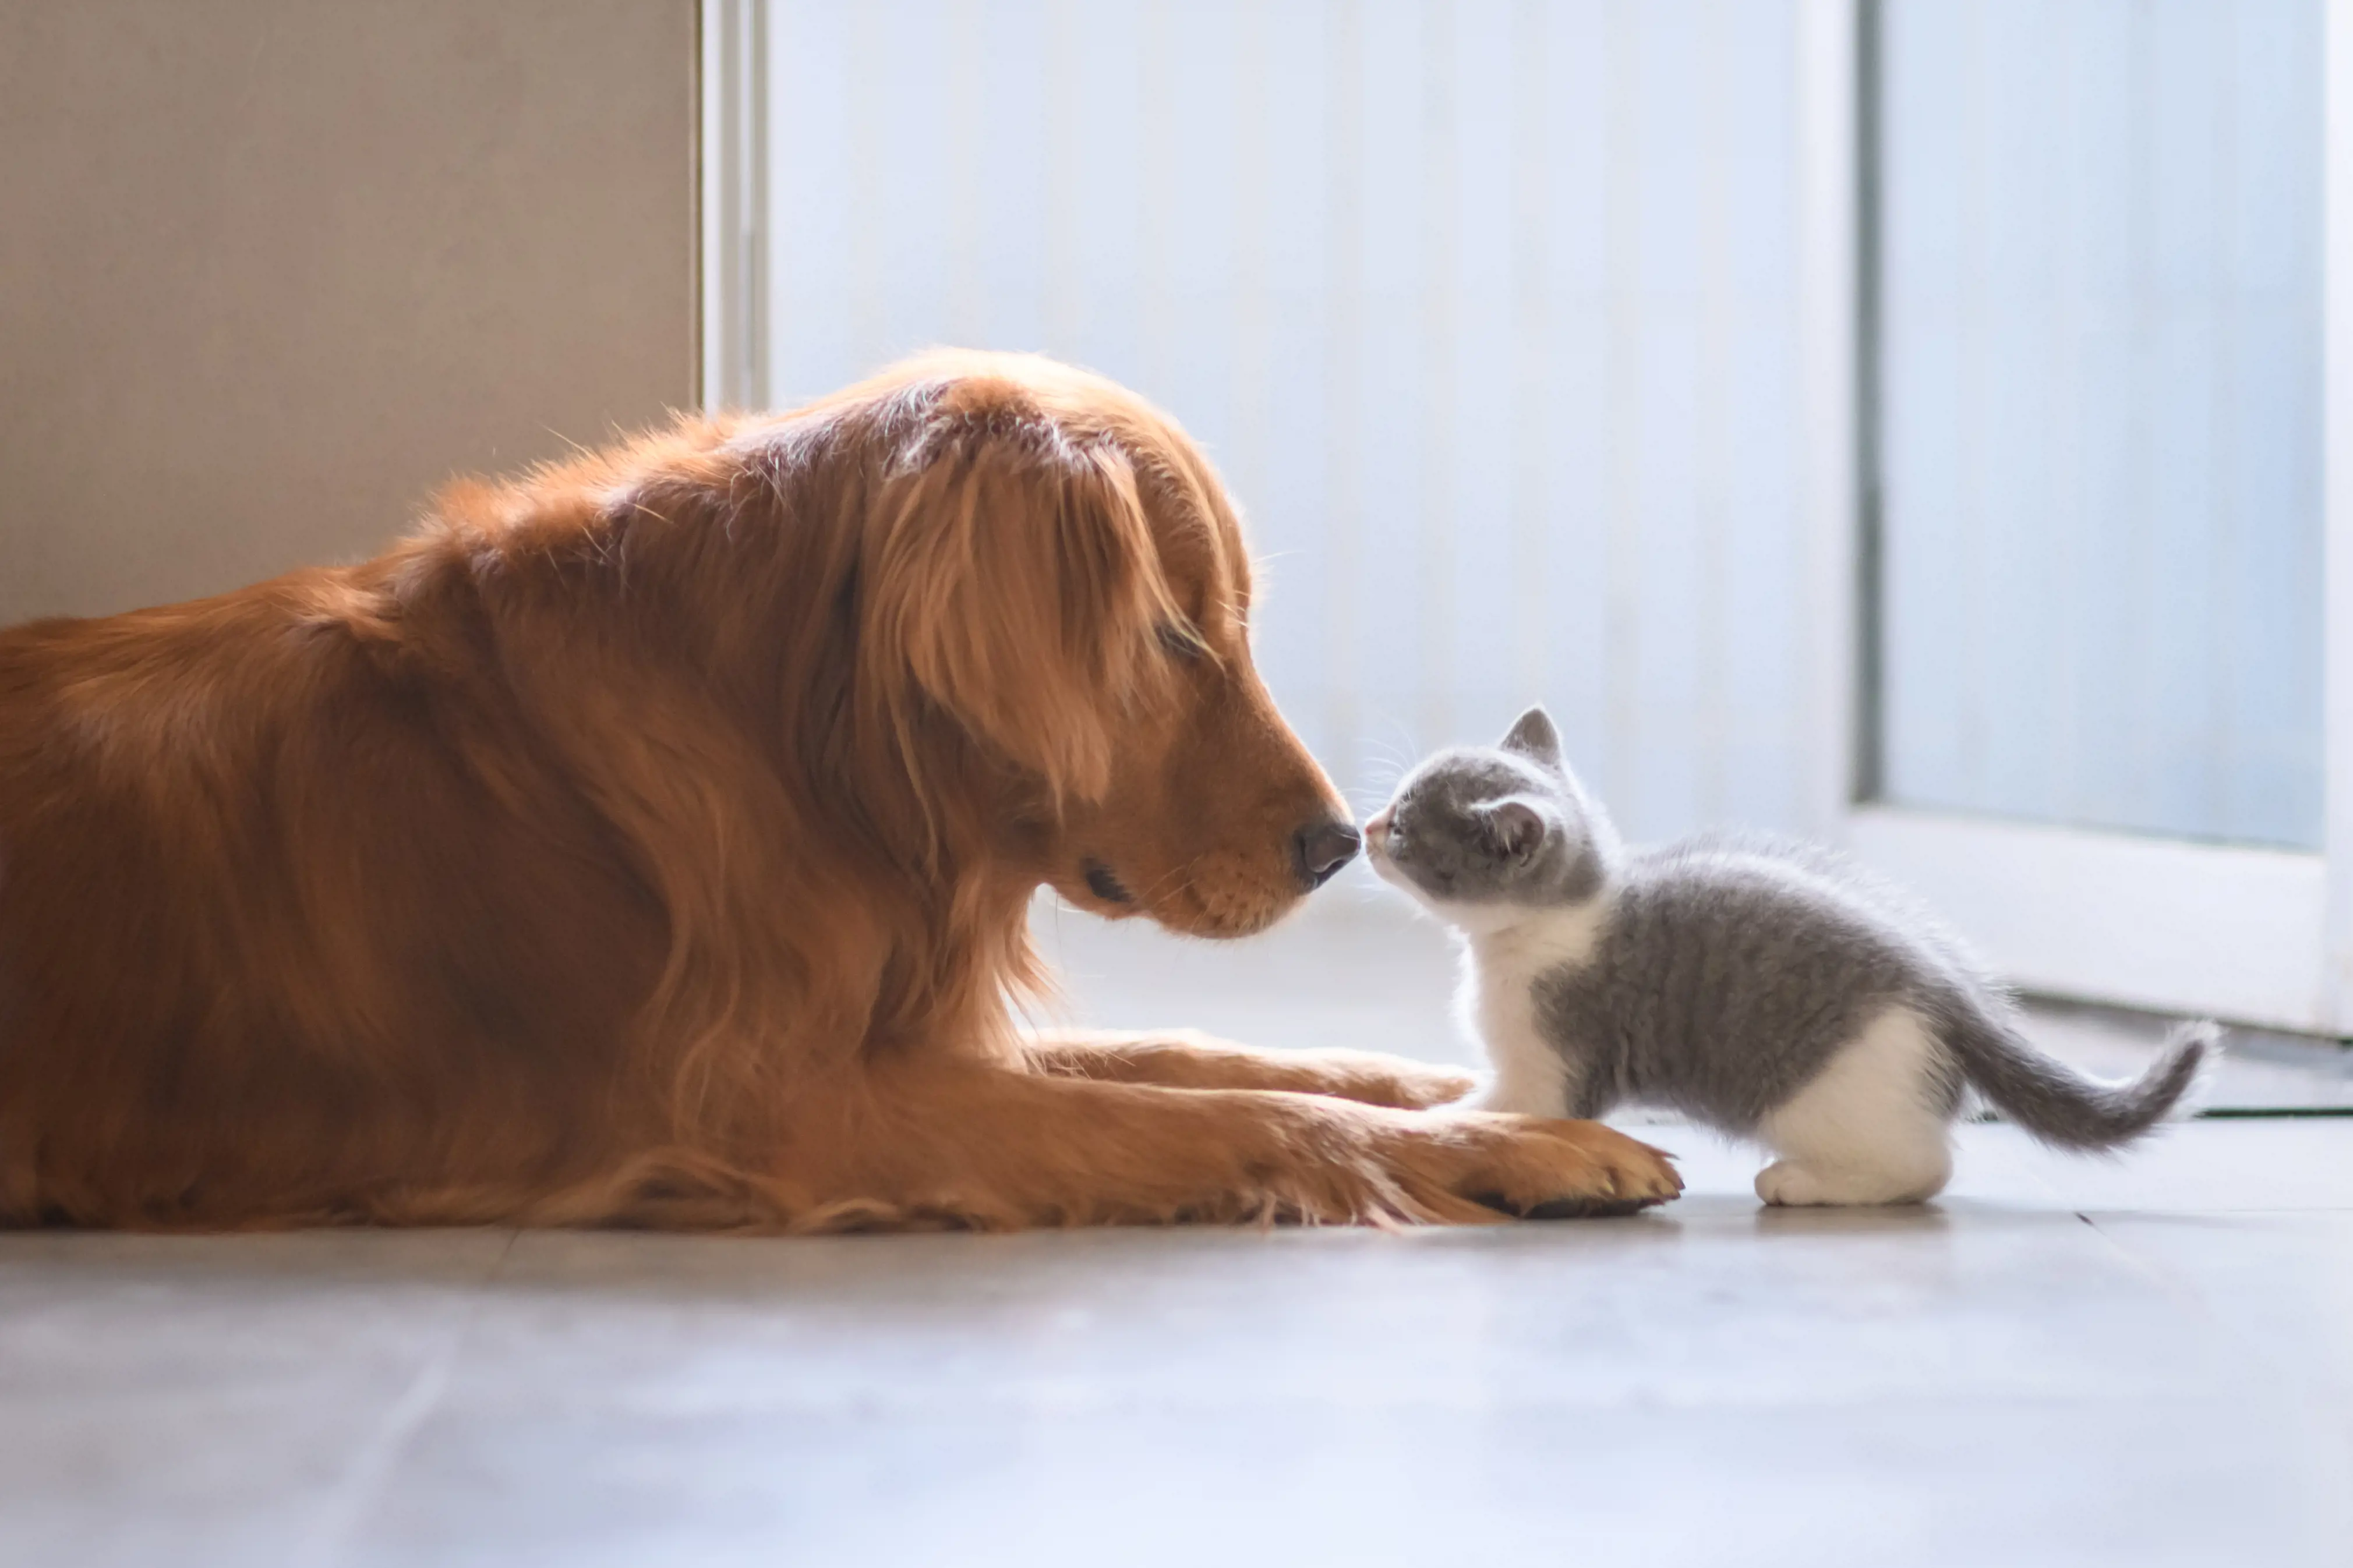 5 Astonishing Similarities Between Cats and Dogs